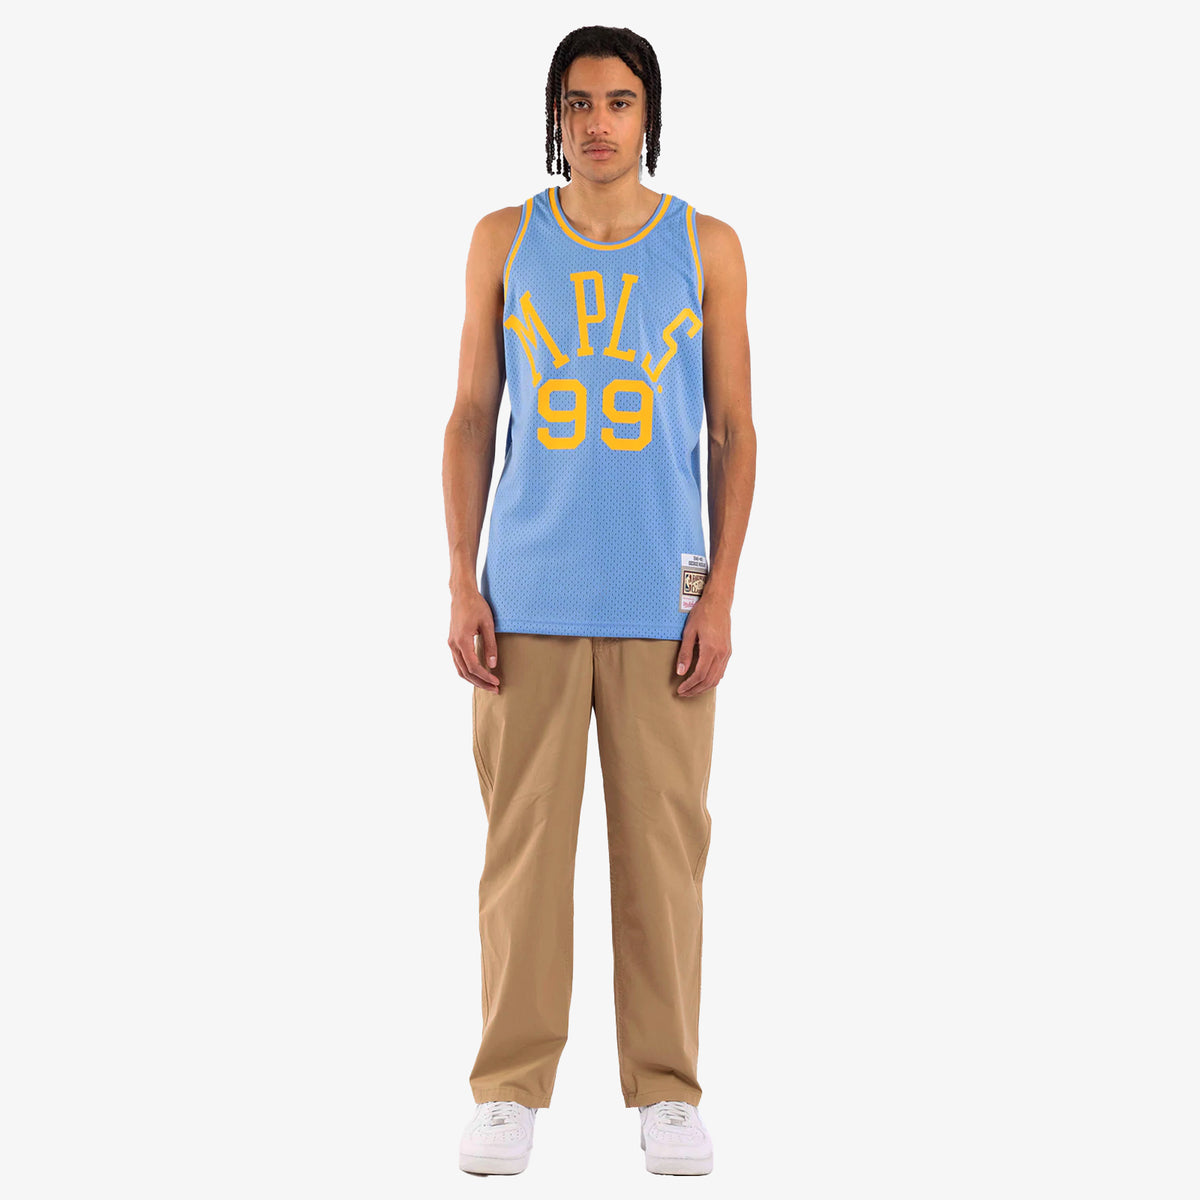 Swingman George Mikan Minneapolis Lakers 1948-49 Jersey - Shop Mitchell &  Ness Shorts and Pants Mitchell & Ness Nostalgia Co.